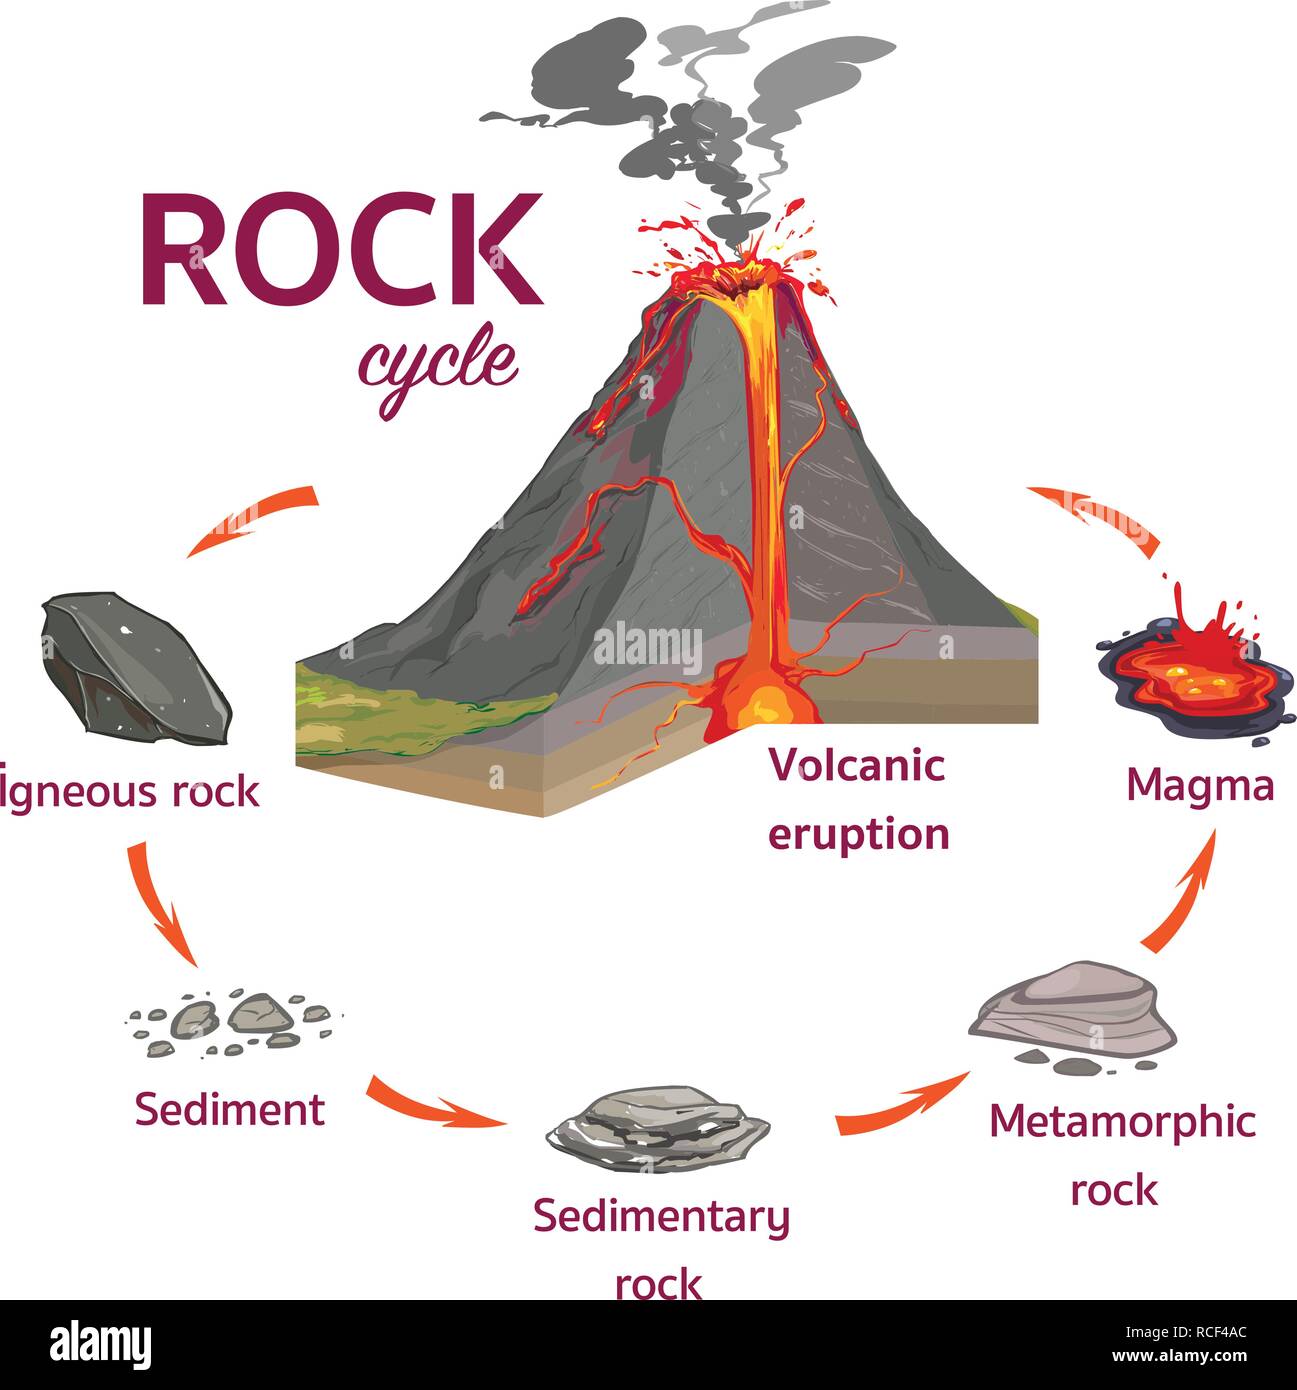 The Rock Cycle Vector İllustration Stock Vector